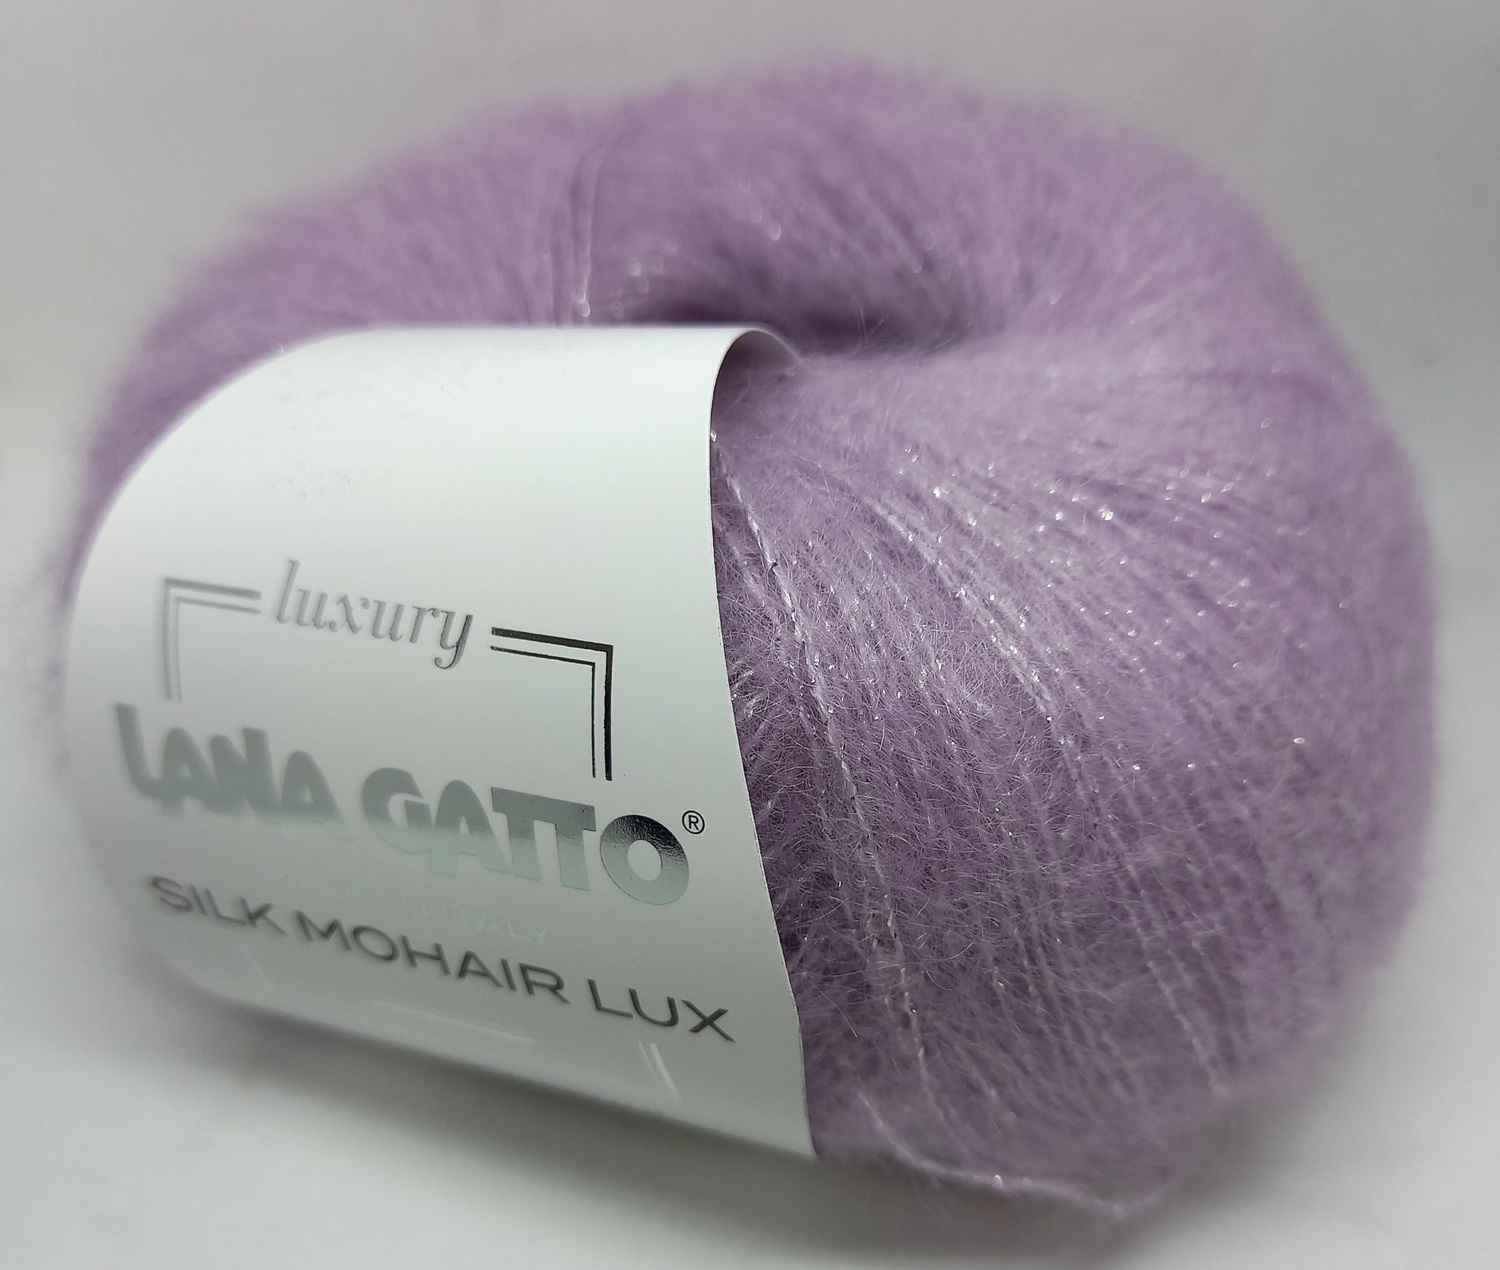 Silk Mohair Lux - 8481 астра